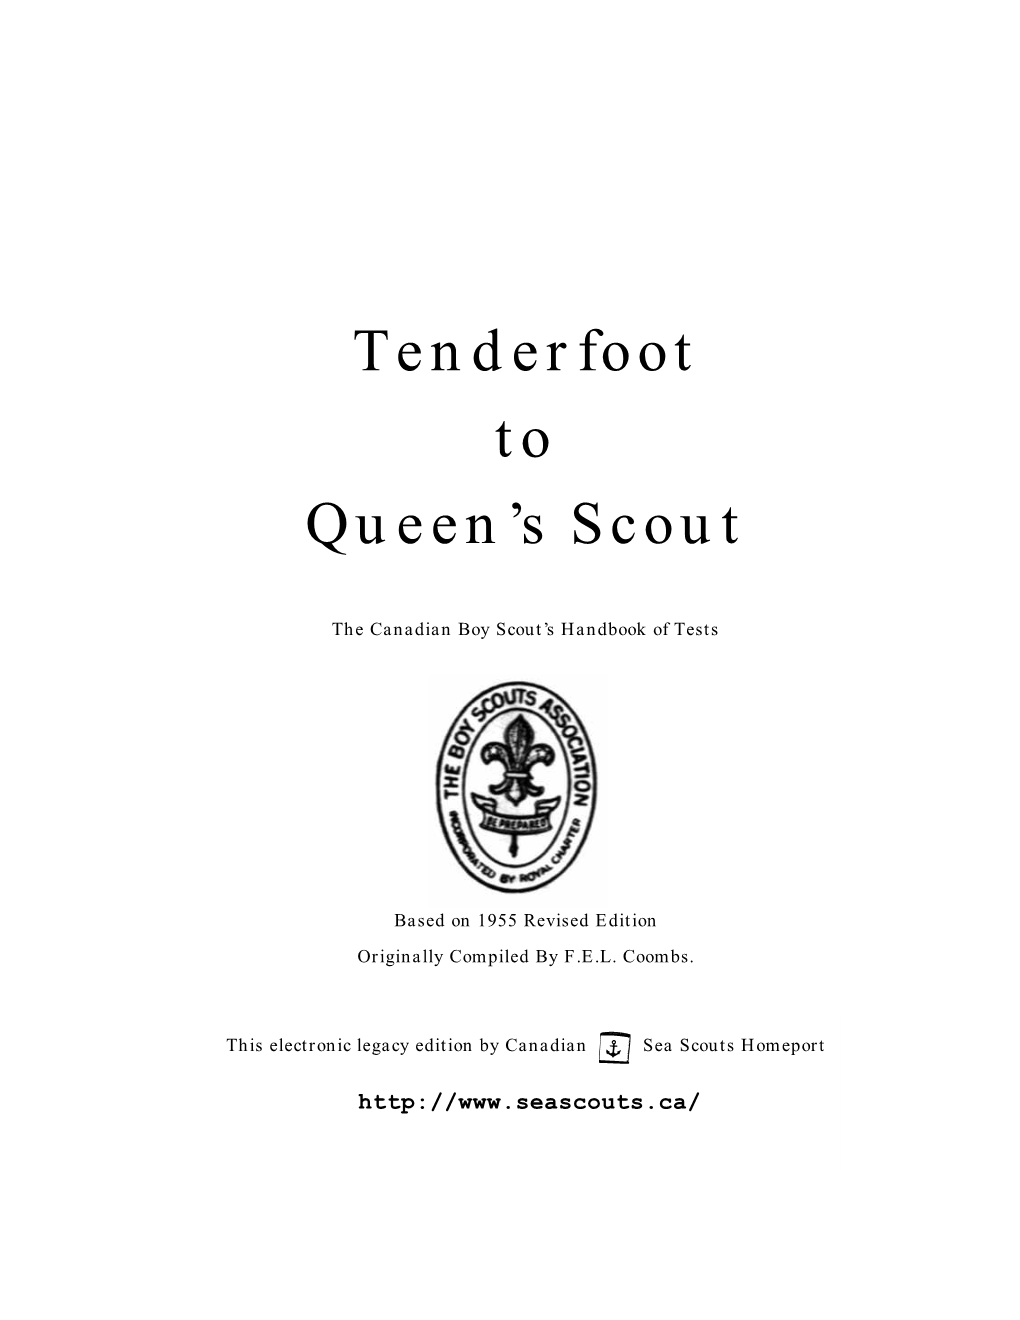 Tenderfoot to Queen's Scout